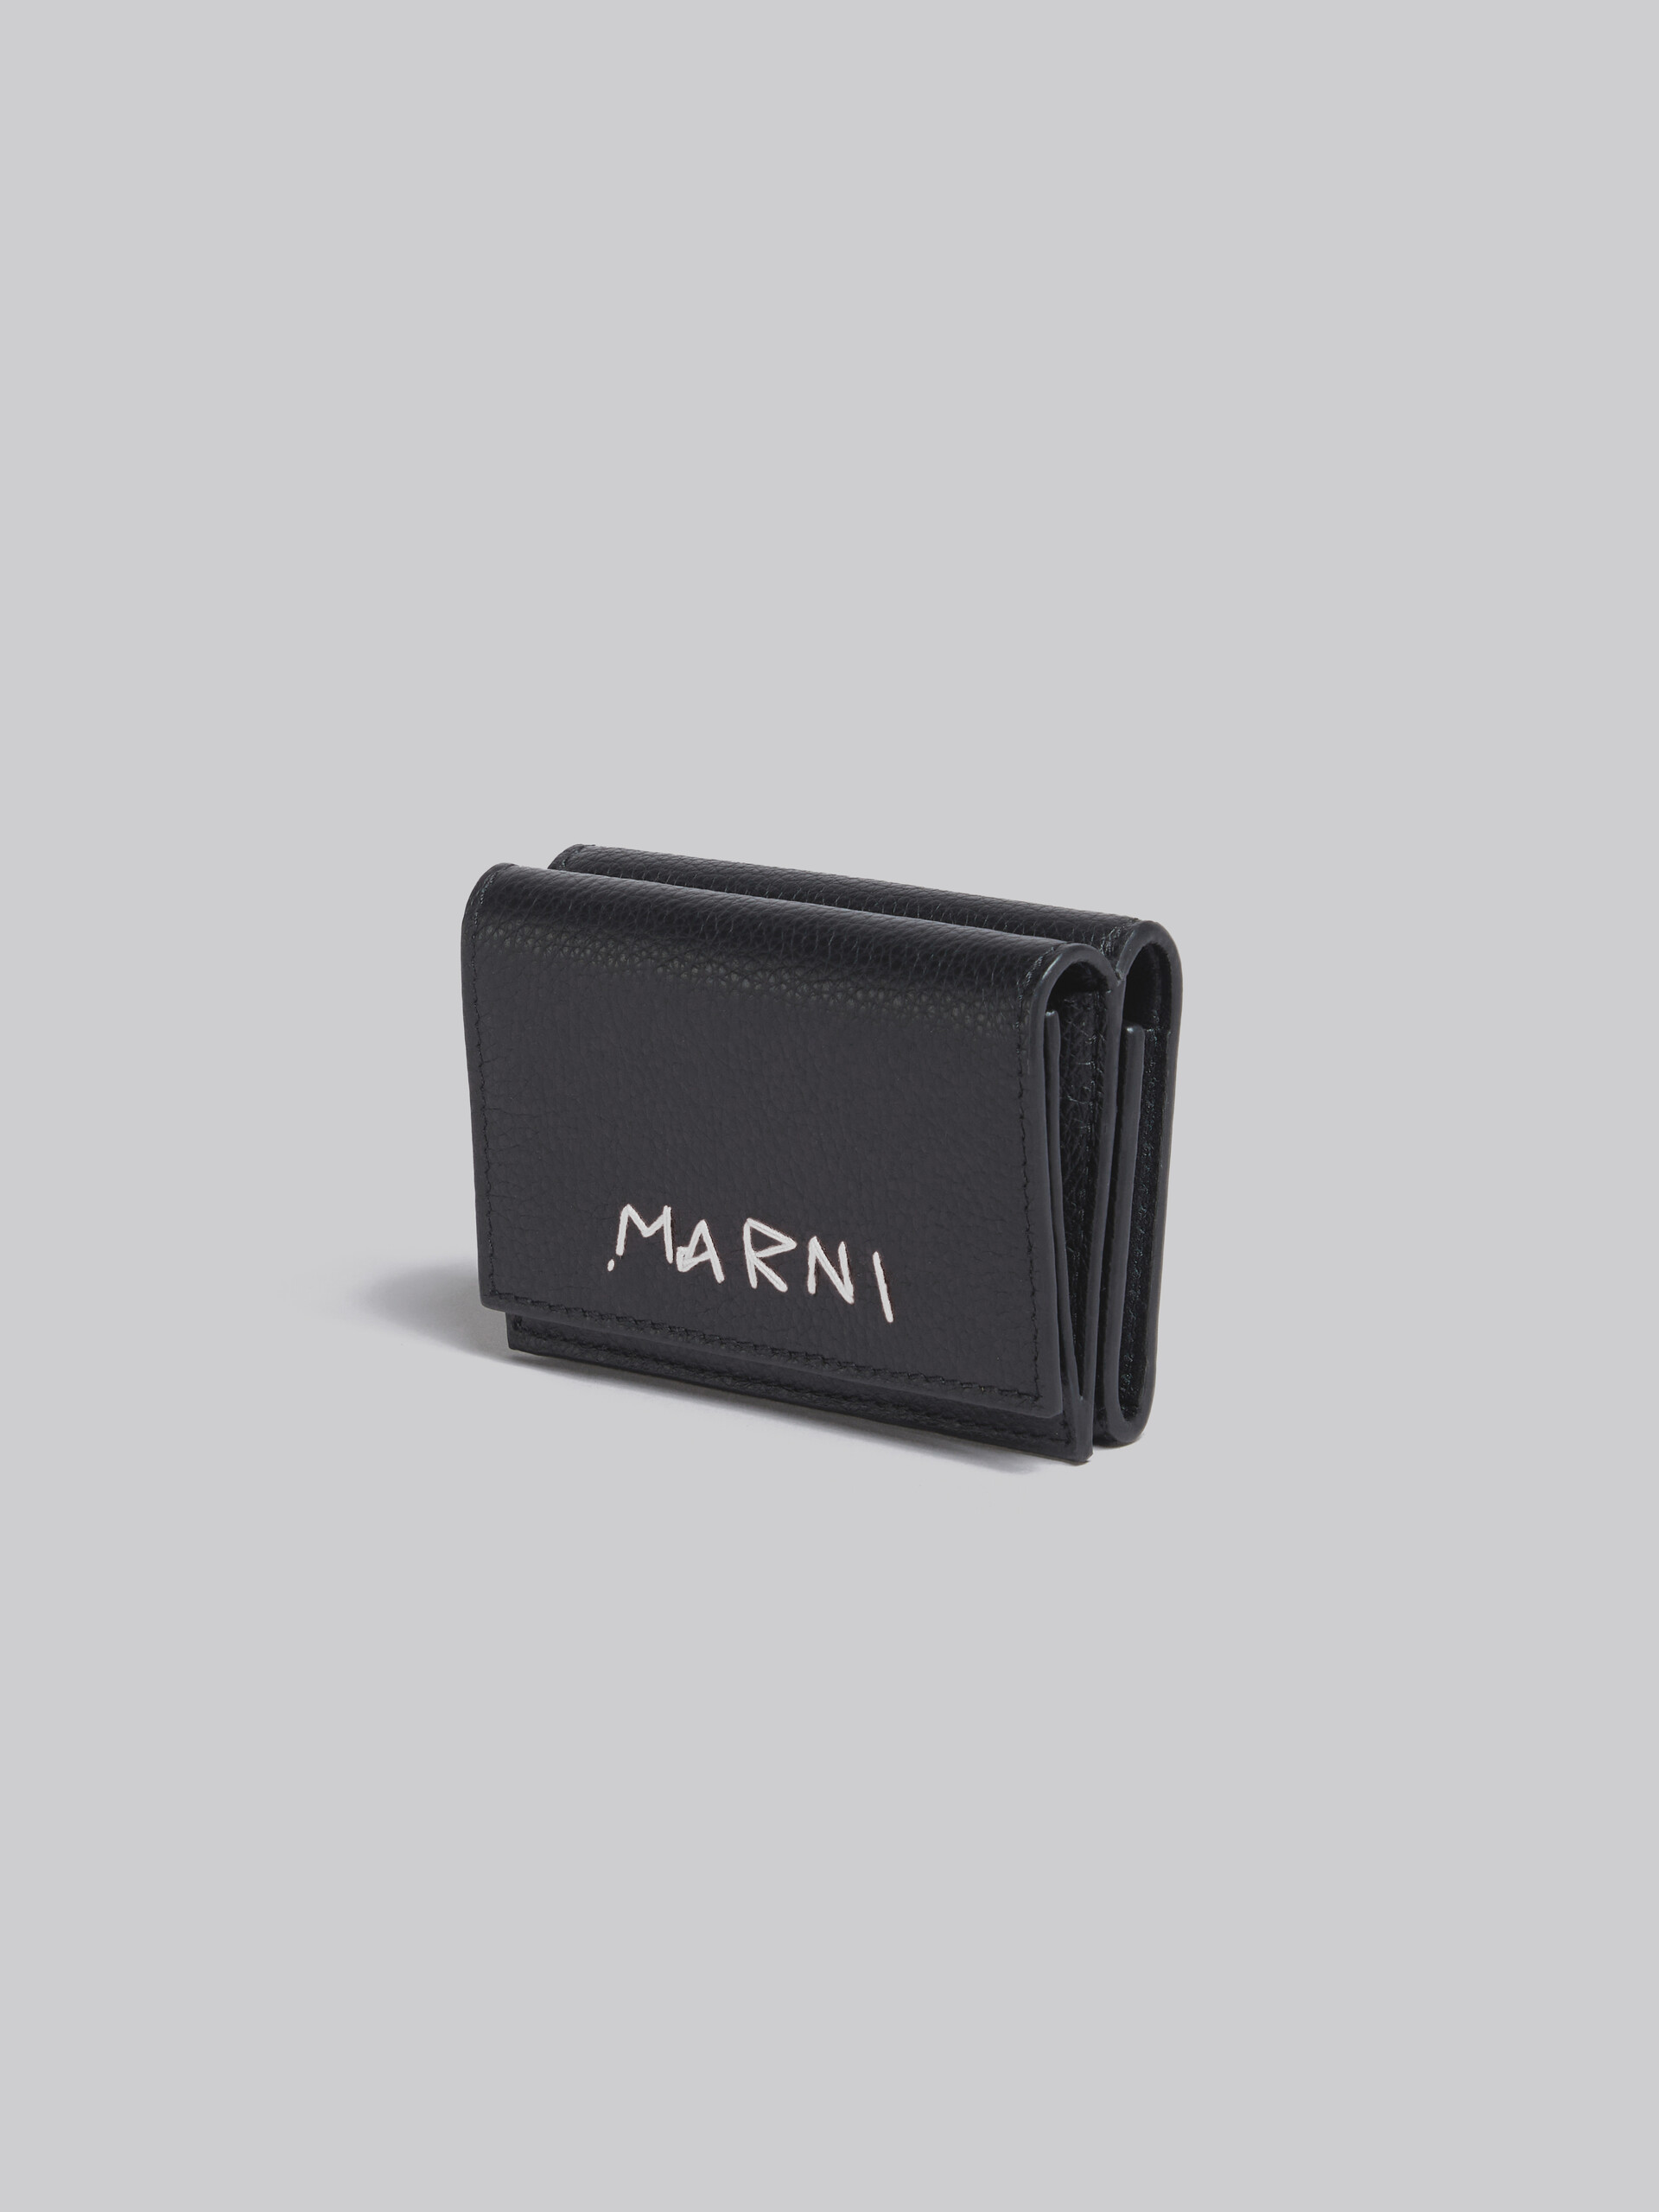 Black leather trifold wallet with Marni mending - Wallets - Image 4